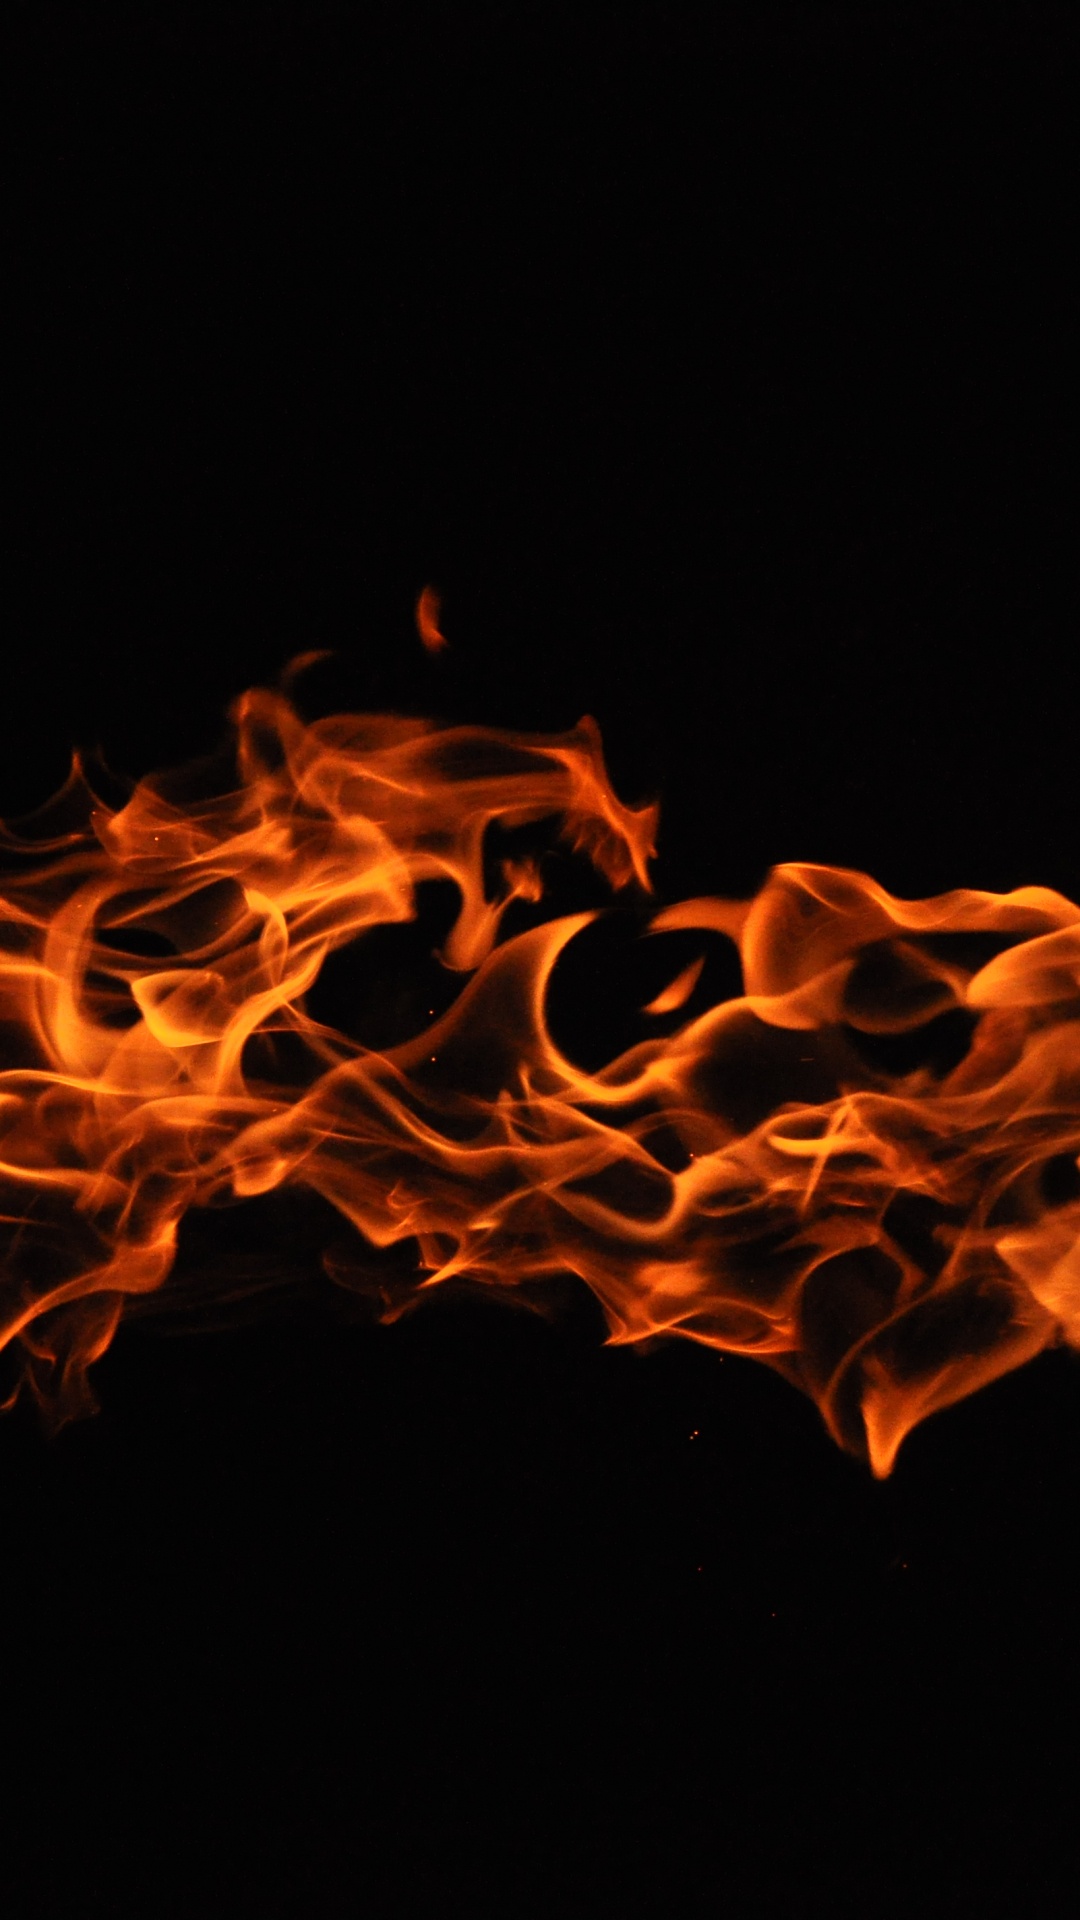 Fire in Black Background With Black Background. Wallpaper in 1080x1920 Resolution